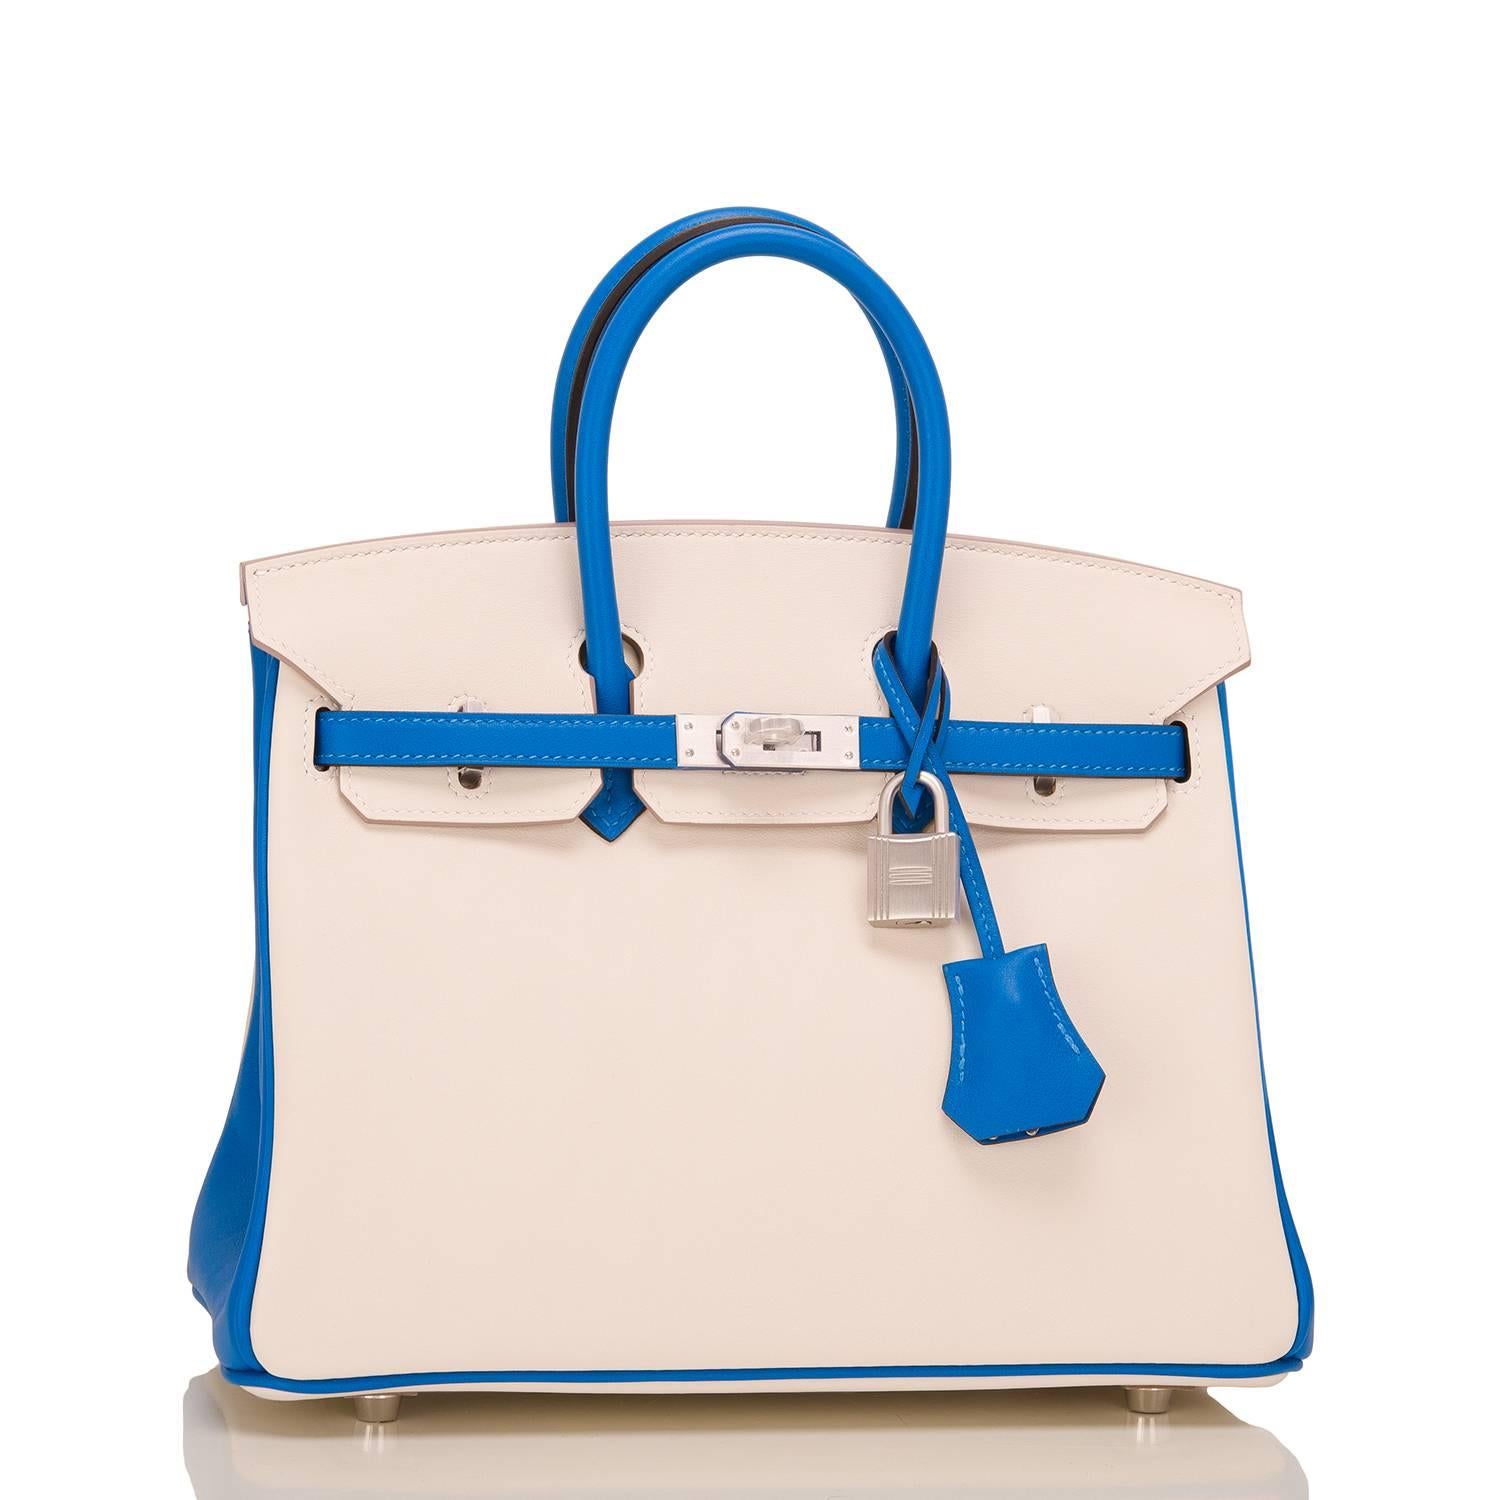 Hermes Horseshoe Stamp (HSS) Birkin 25cm of blue hydra and craie swift leather with brushed palladium hardware.

This Special Order Birkin has tonal stitching, a front toggle closure, a clochette with lock and two keys, and double rolled